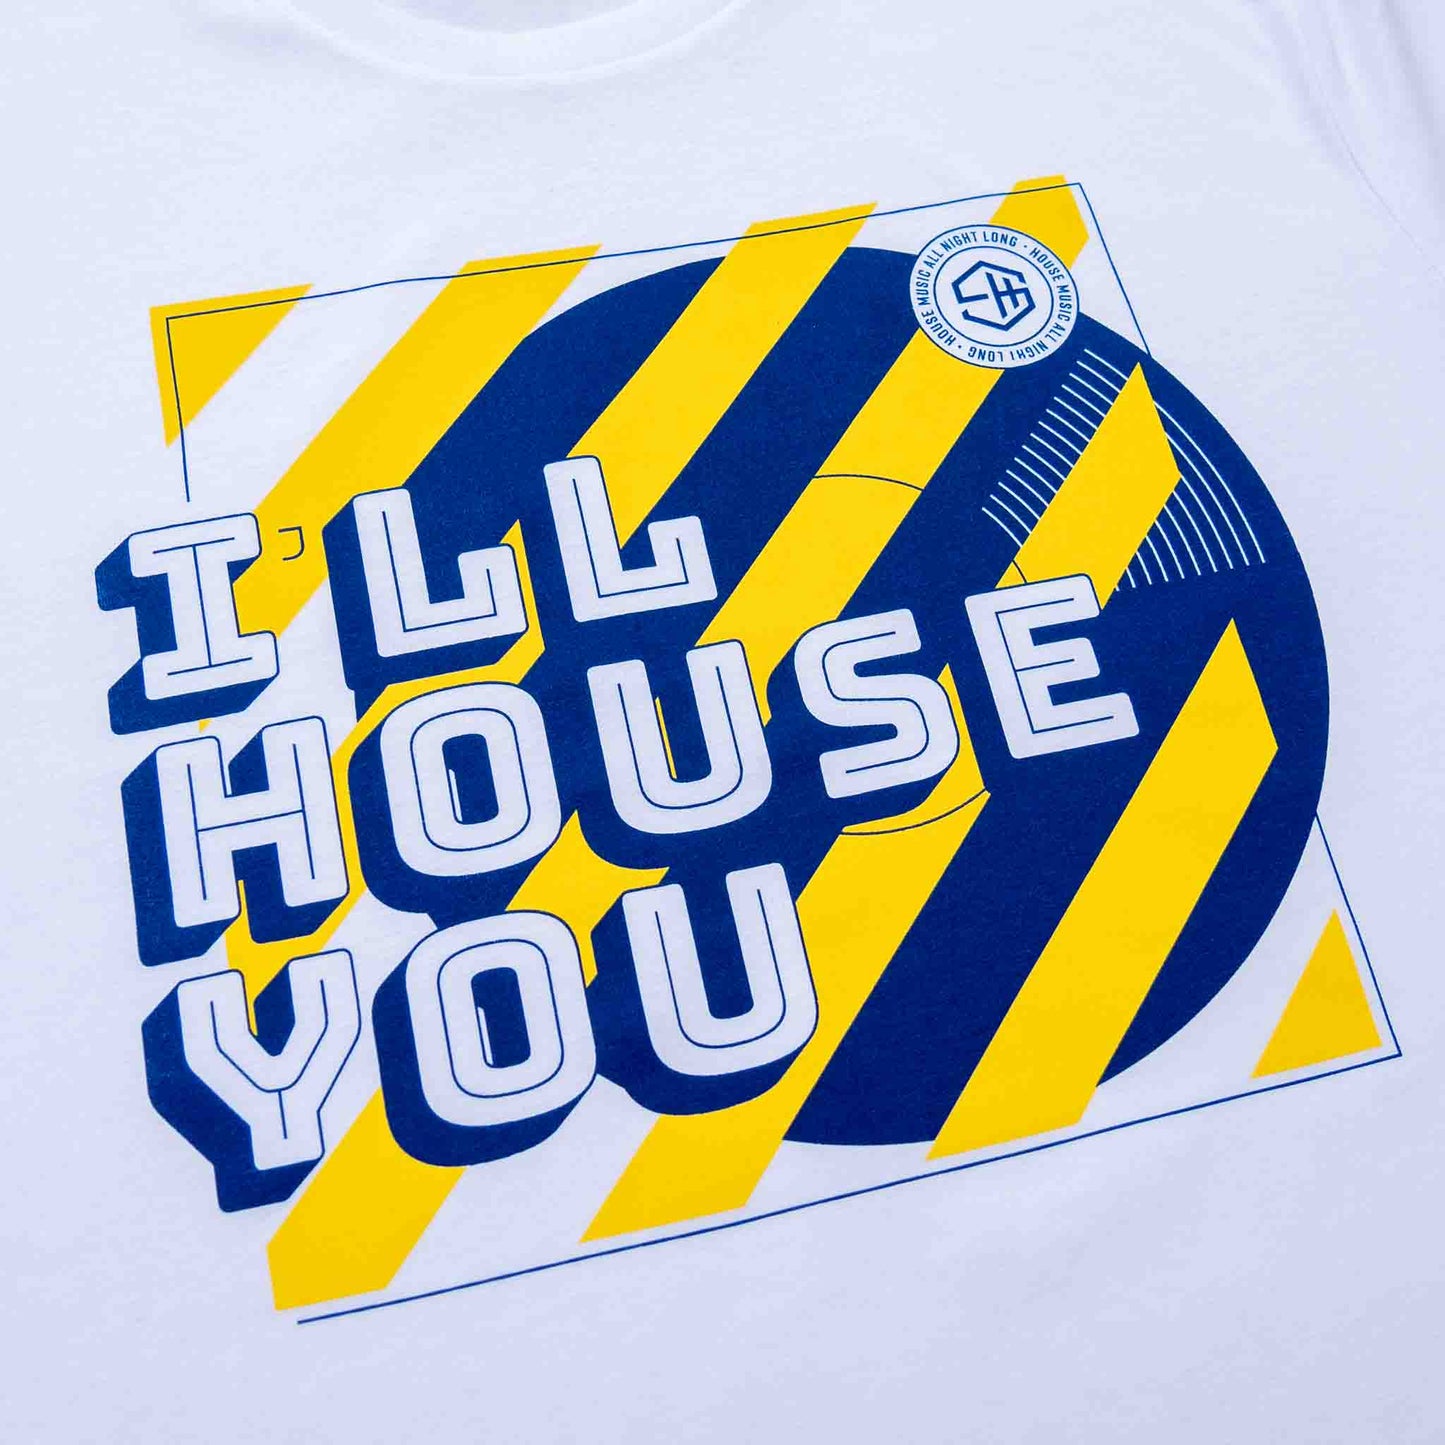 Close up of the 'I'll House you' typographic design.